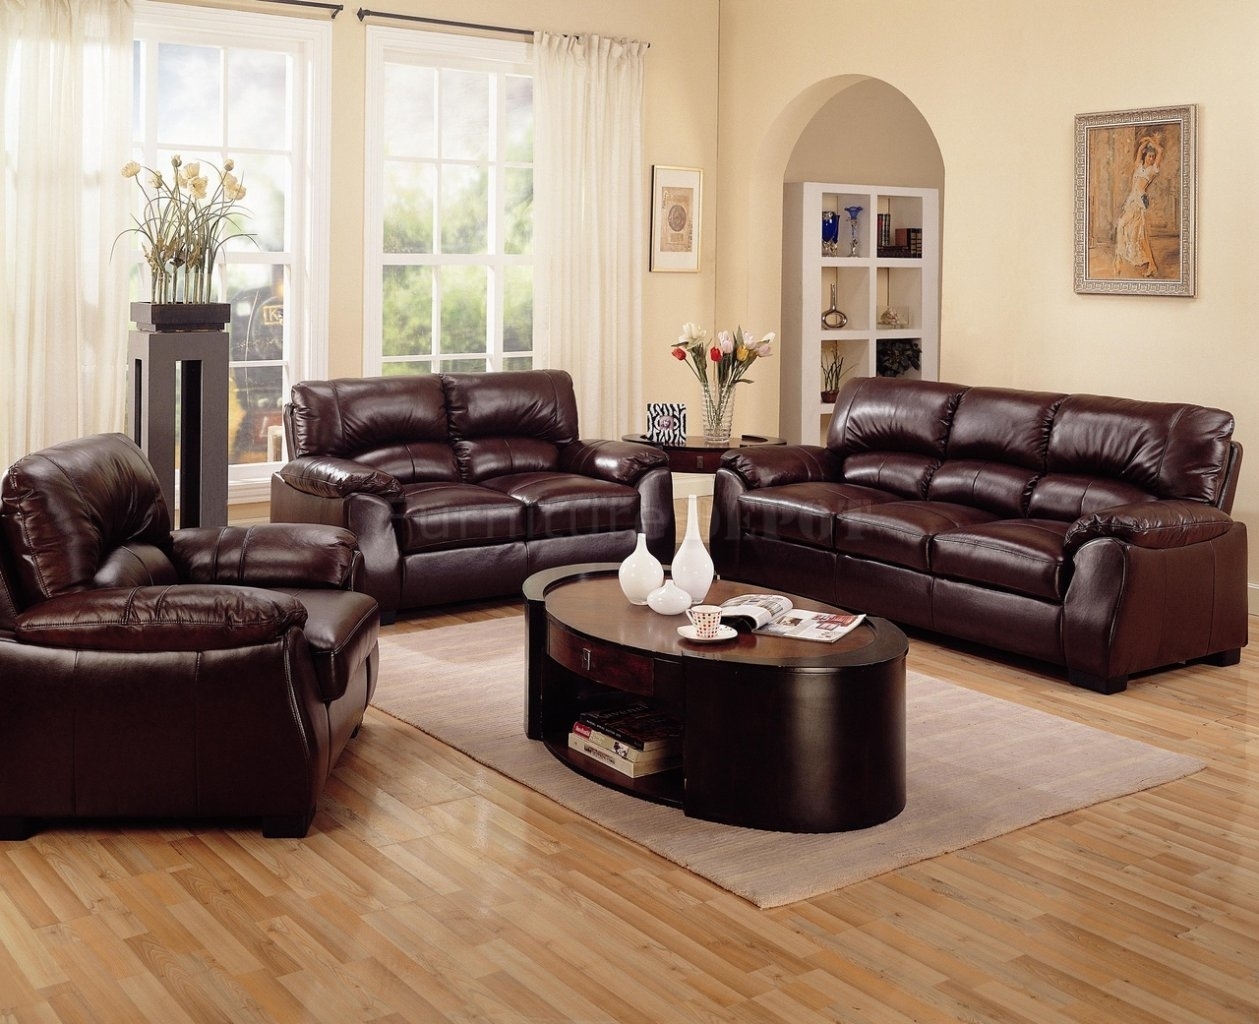 living room ideas with leather furniture room design ideas brown leather sofa with brown leather living RVAFMPC